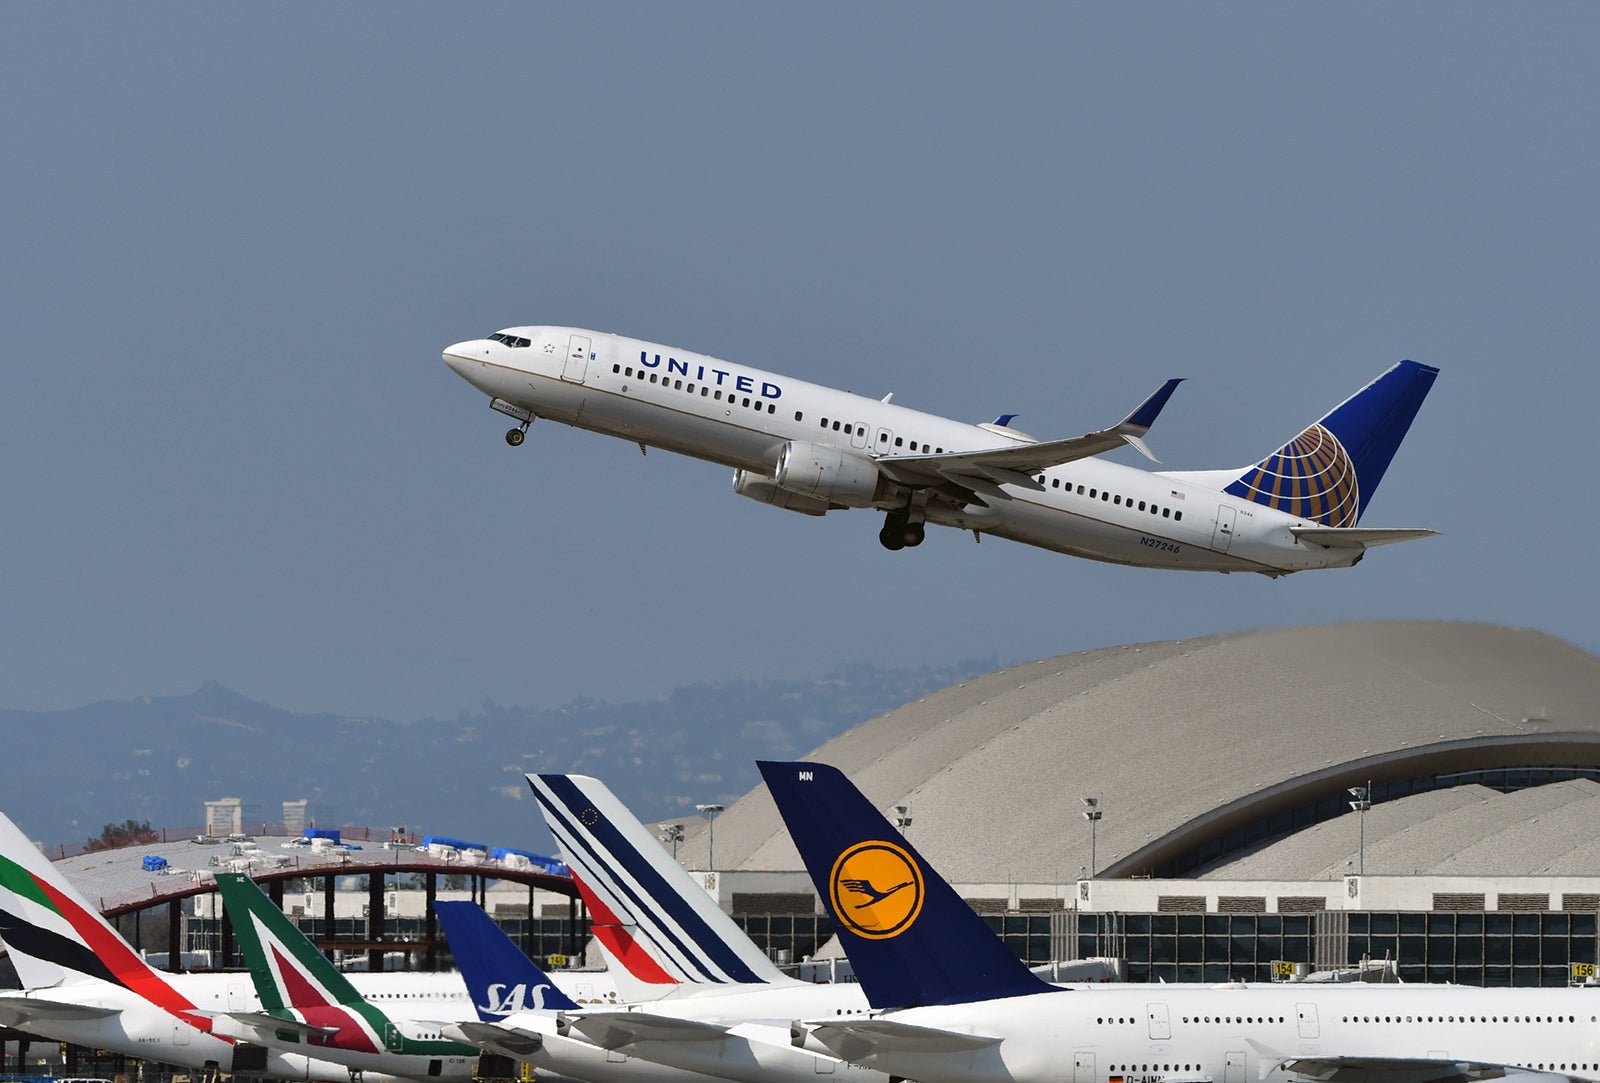 United 737 and other airplanes at LAX Airport